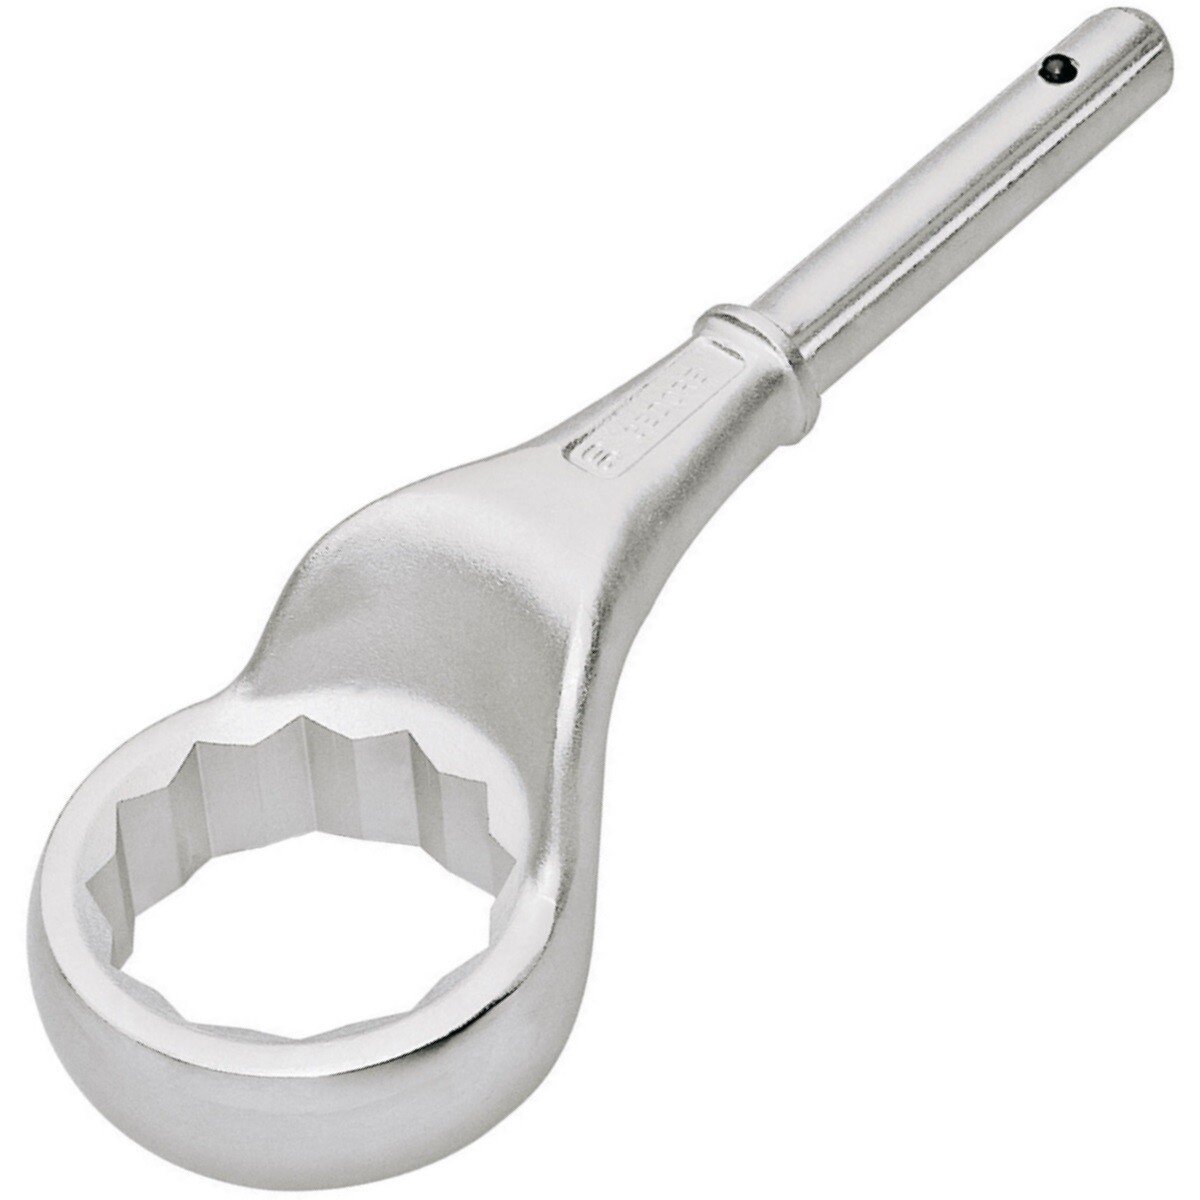 Gedore 6034300 41mm Single Ended Ring Spanner 2A 41